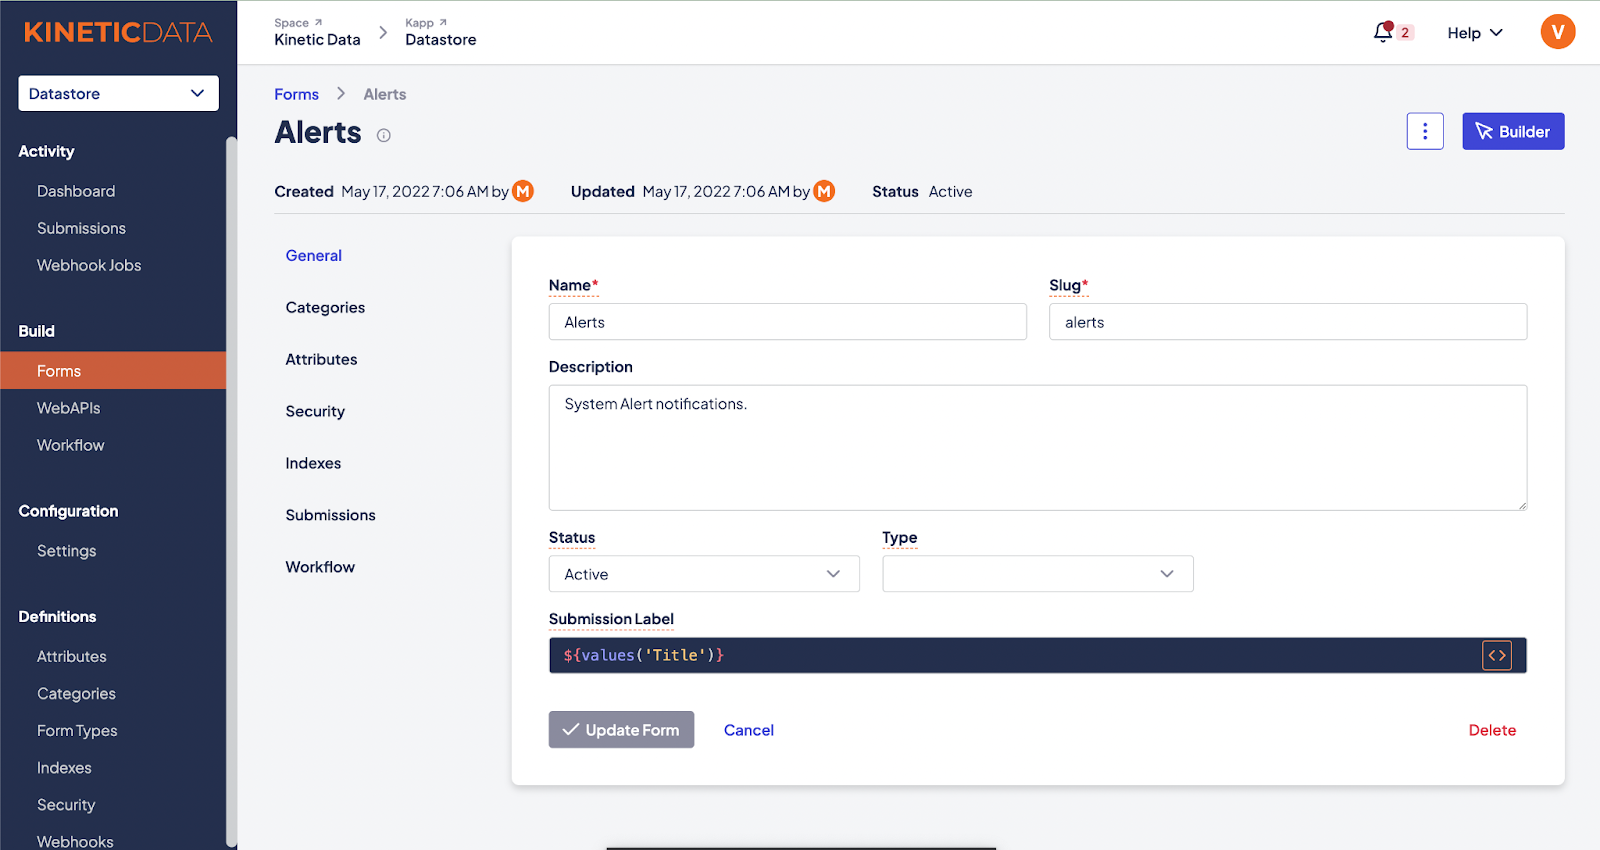 More Easily Configure Your Forms